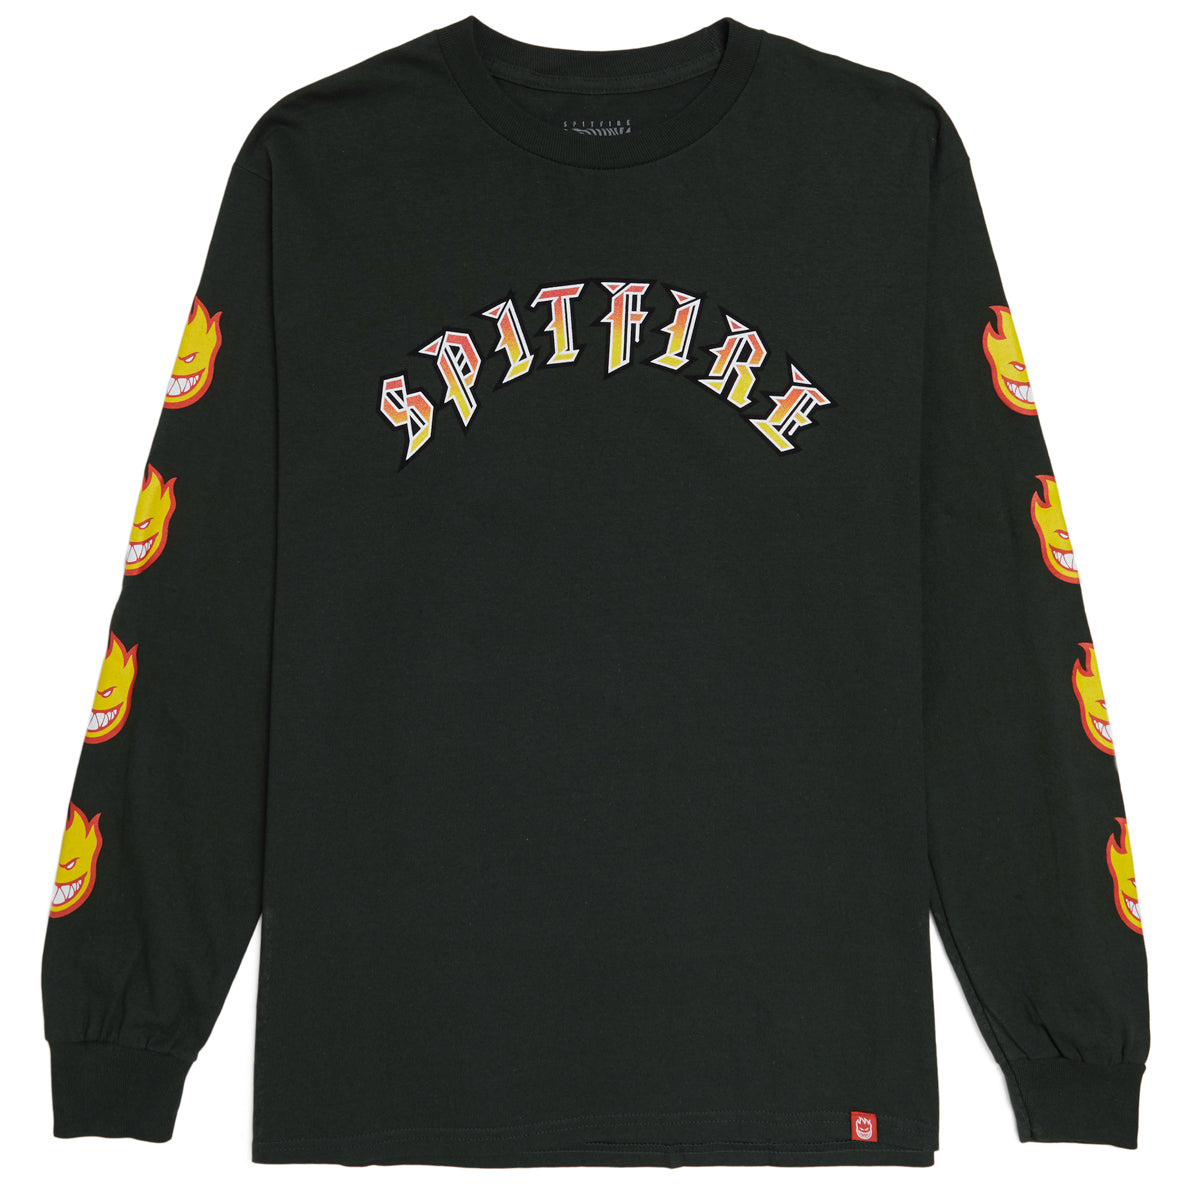 Spitfire Old E Bighead Fill Long Sleeve T-Shirt - Forest Green/Gold/Red image 1